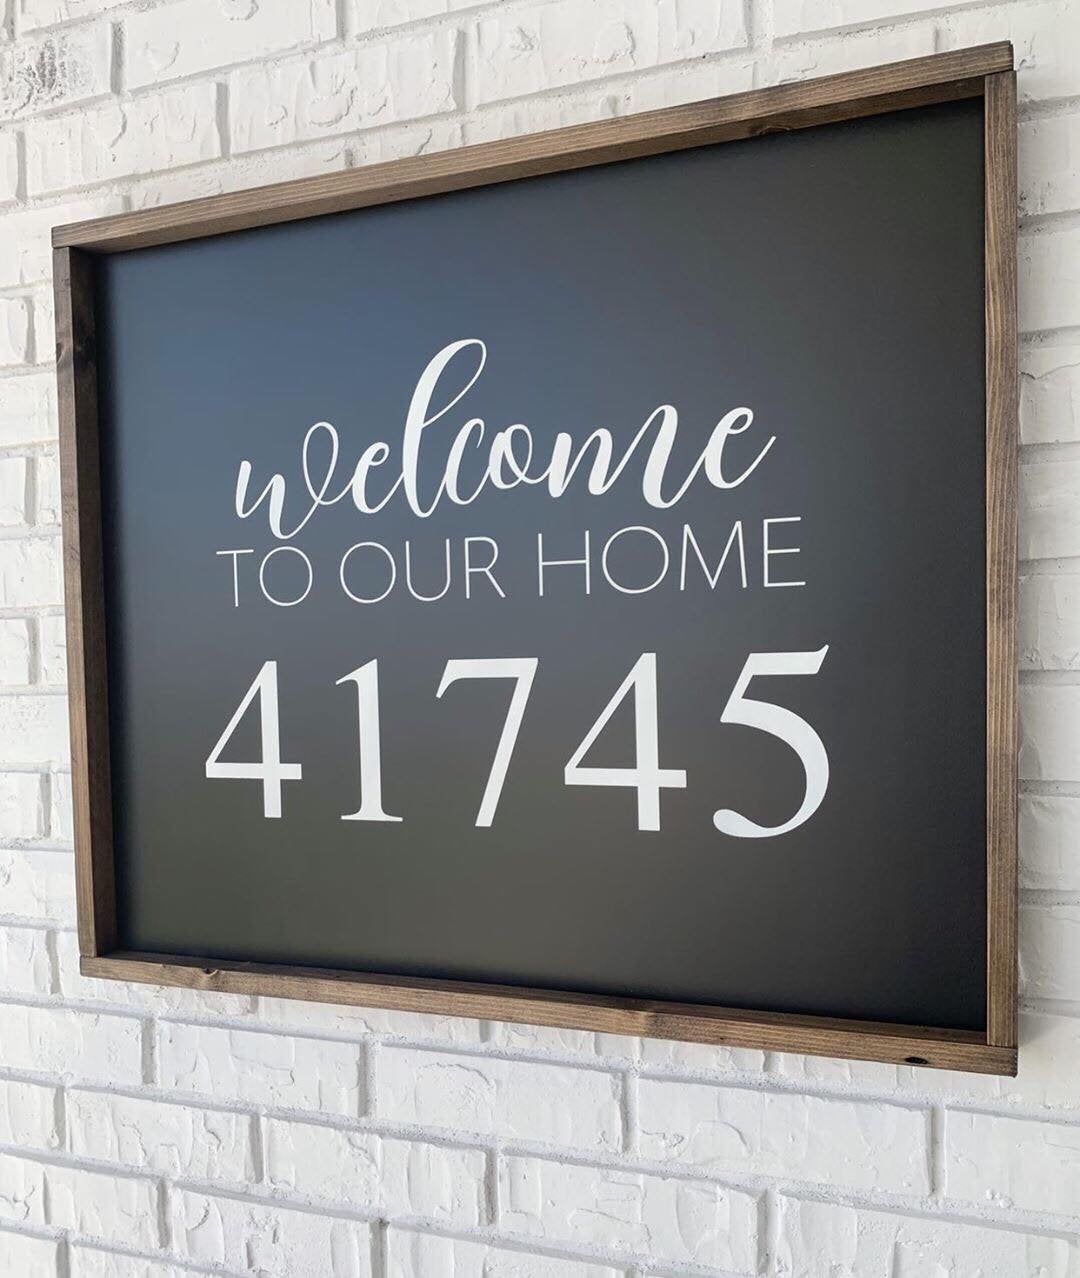 Welcome to our home Address Number